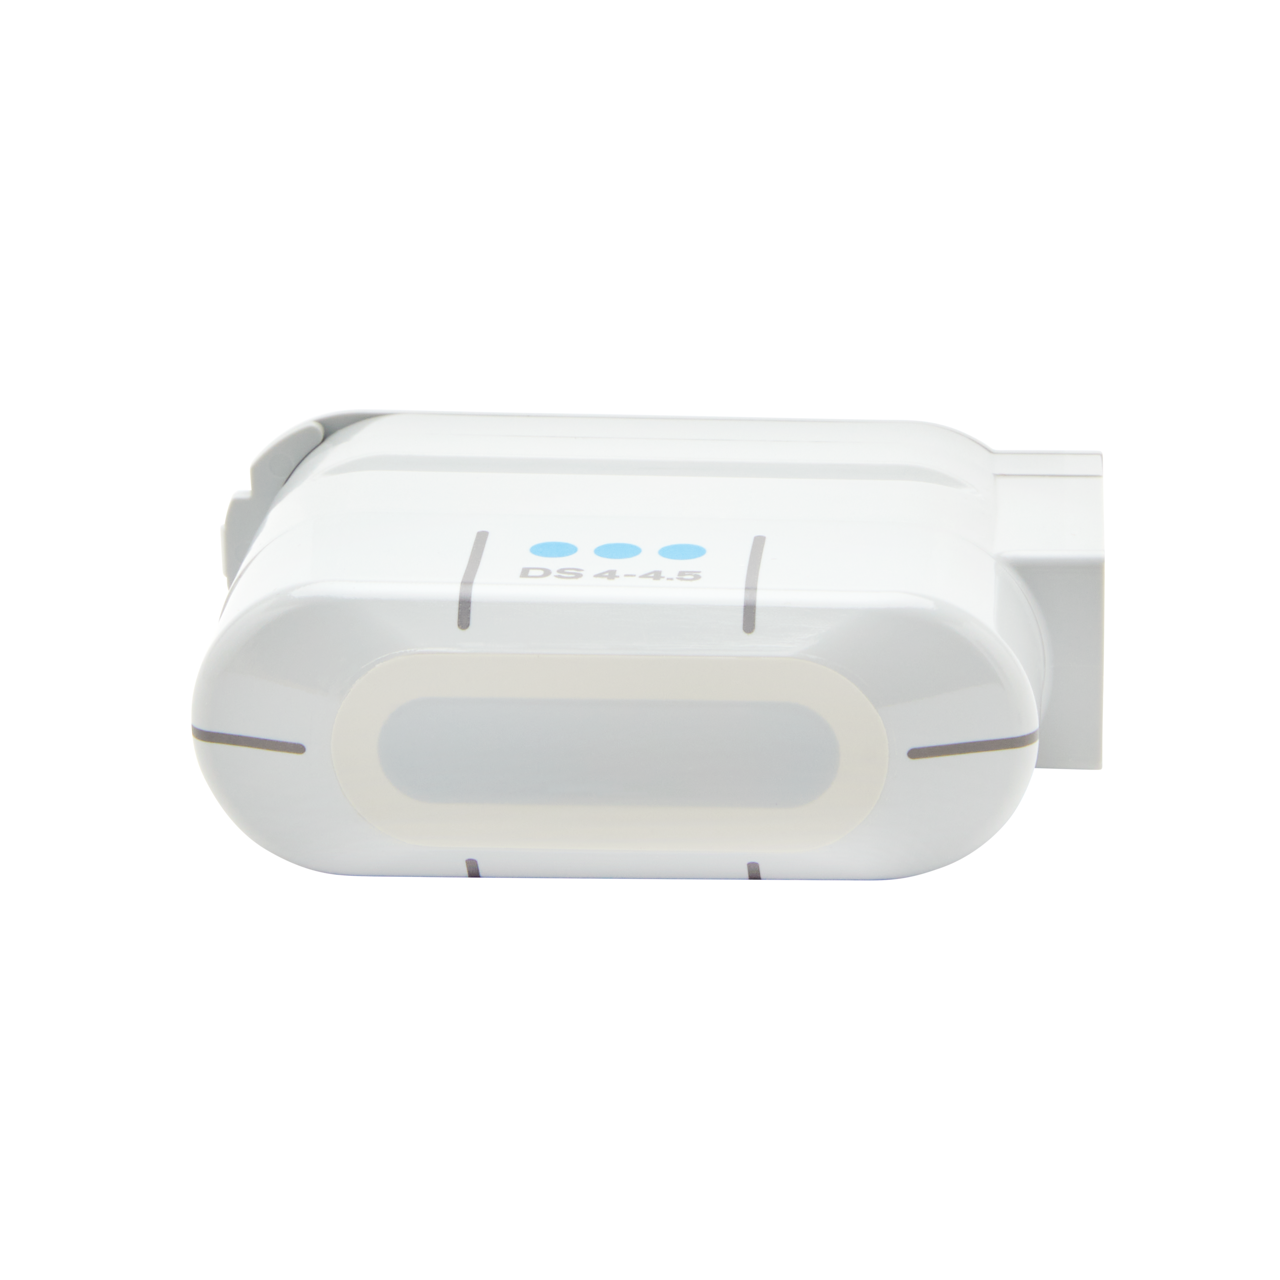 Ultherapy DeepSEE DS 4-4.5 (Blue) Transducer